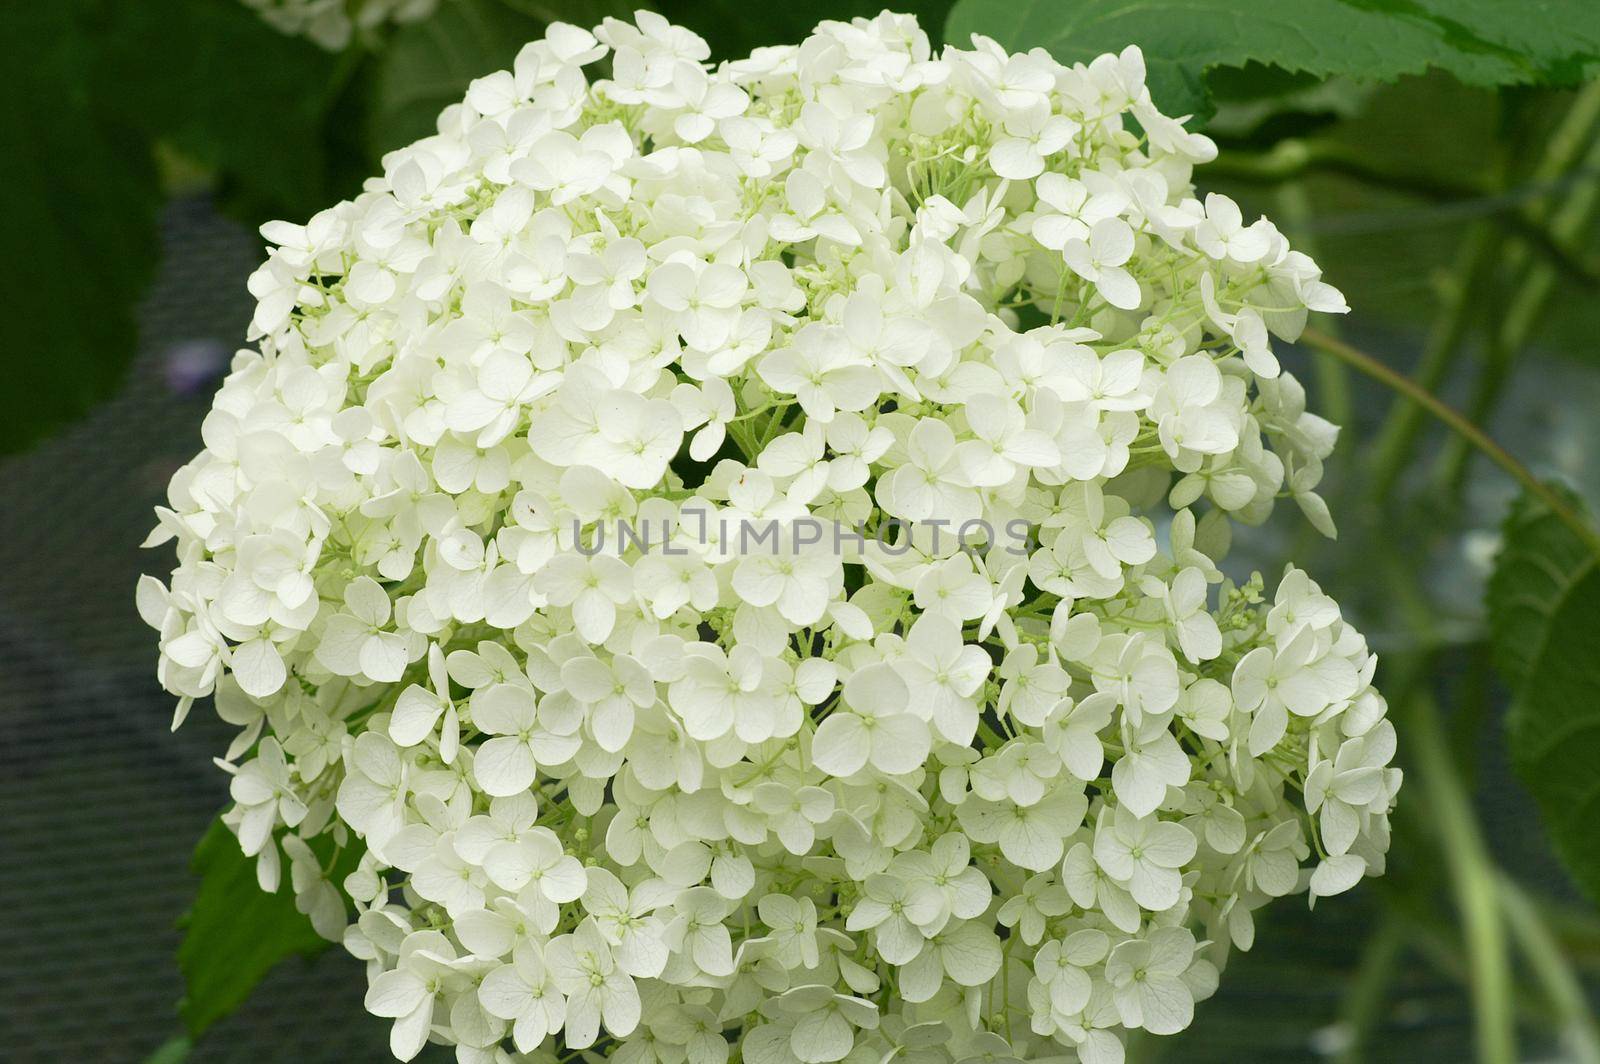 A Hydrangea Annabelle. White hydrangea Annabelle blooming in garden, close up seen from above, with green leafs by LeoniekvanderVliet